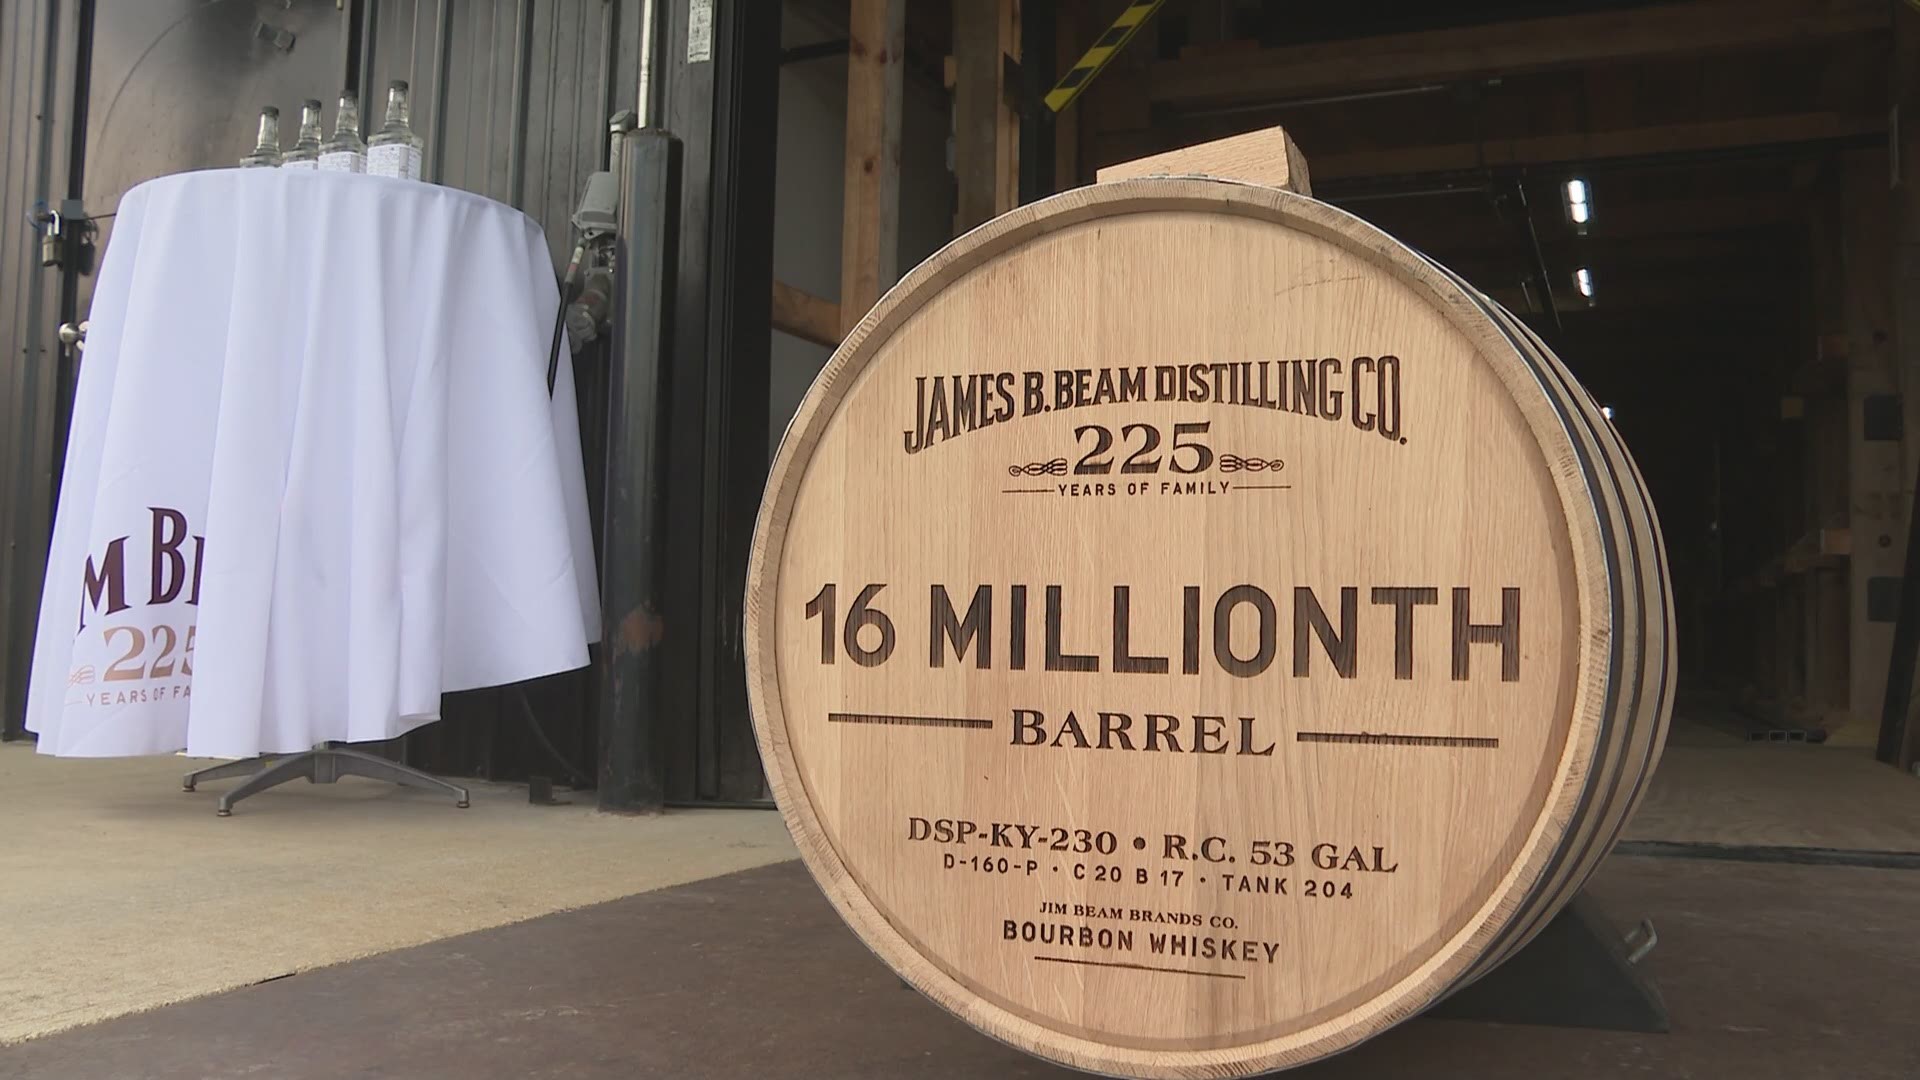 Kentucky's bourbon industry is booming and officials from Jim Beam celebrated their 225th birthday by filling its 16 millionth barrel